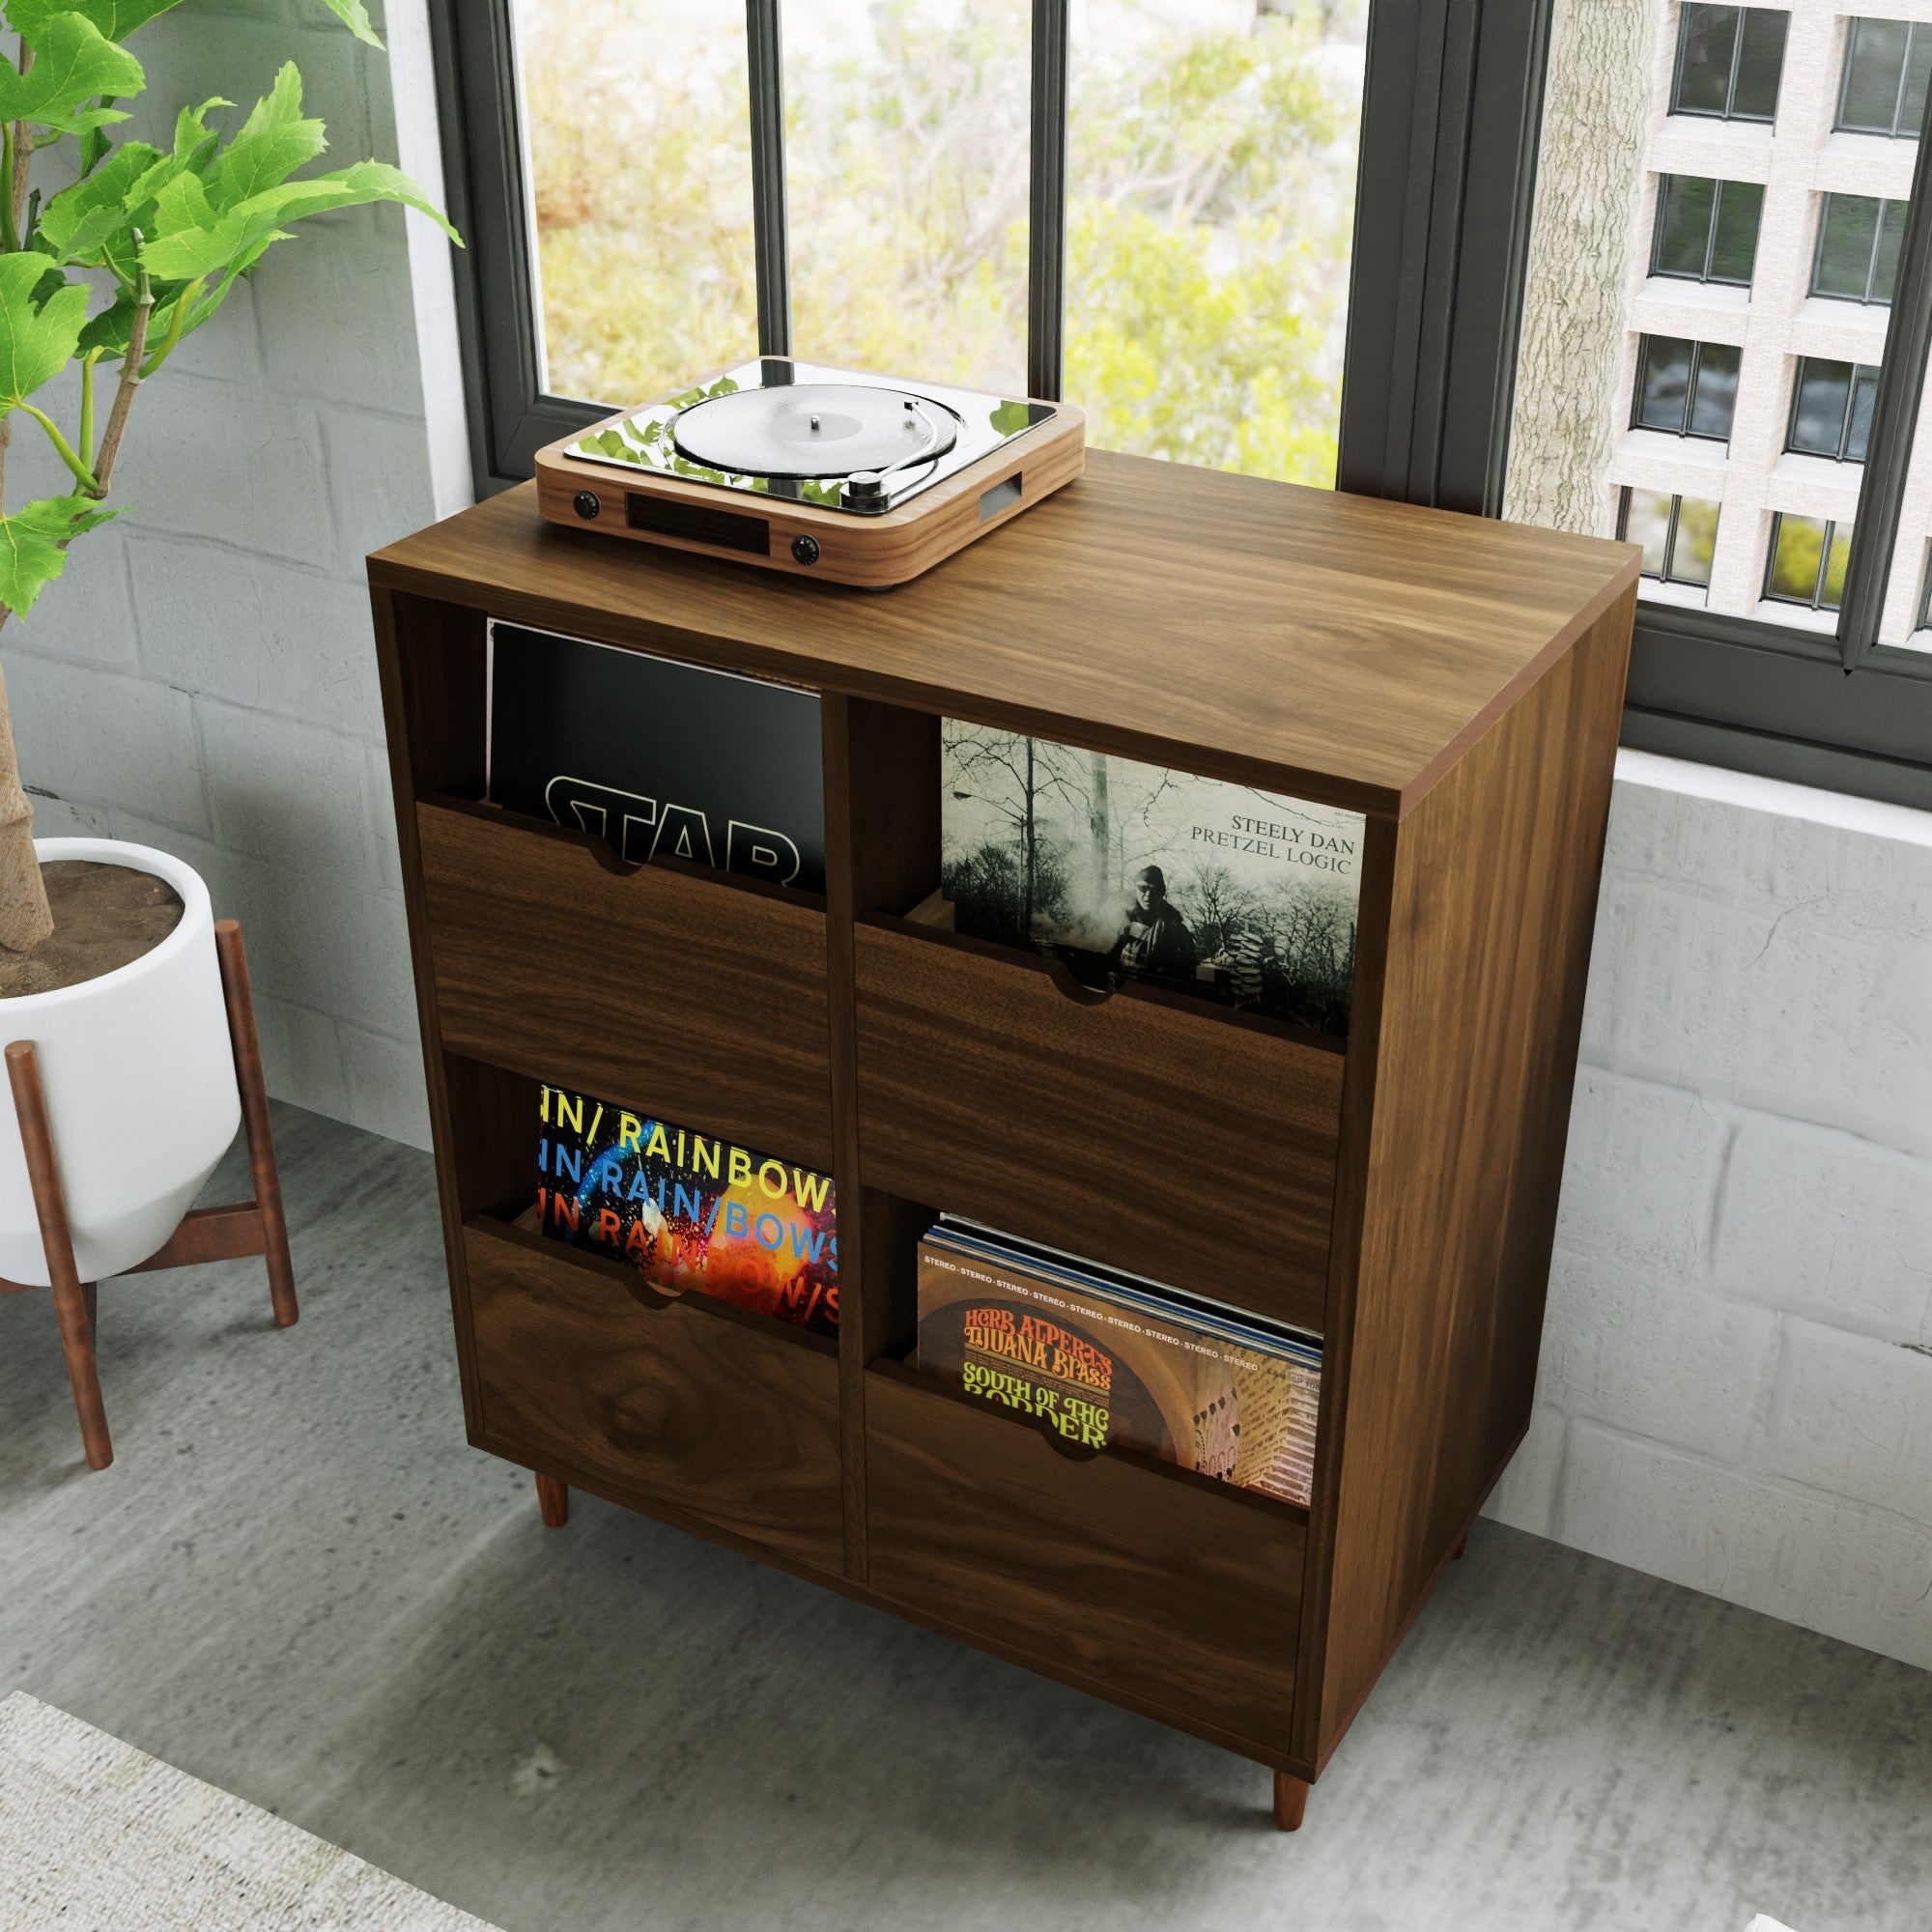 https://cdn.shopify.com/s/files/1/0524/9345/1424/products/record-credenza-with-4-drawers-cabinets-storage-krovel-furniture-co-34024159805600_2048x2048.jpg?v=1682114562